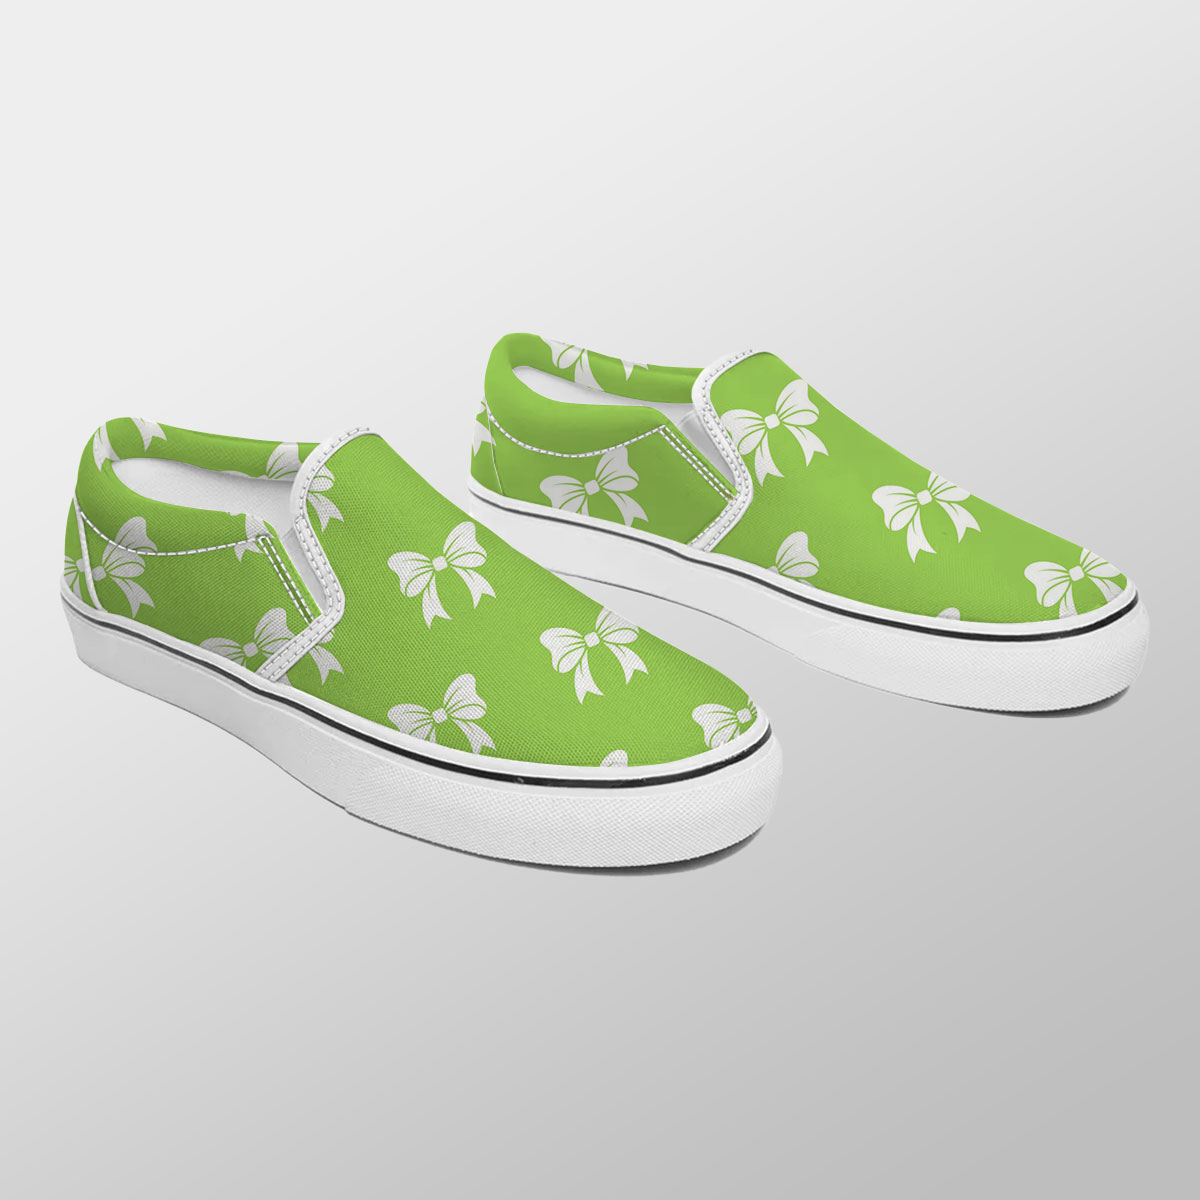 Christmas Bow, Christmas Tree Bows On The Green Background Slip On Sneakers